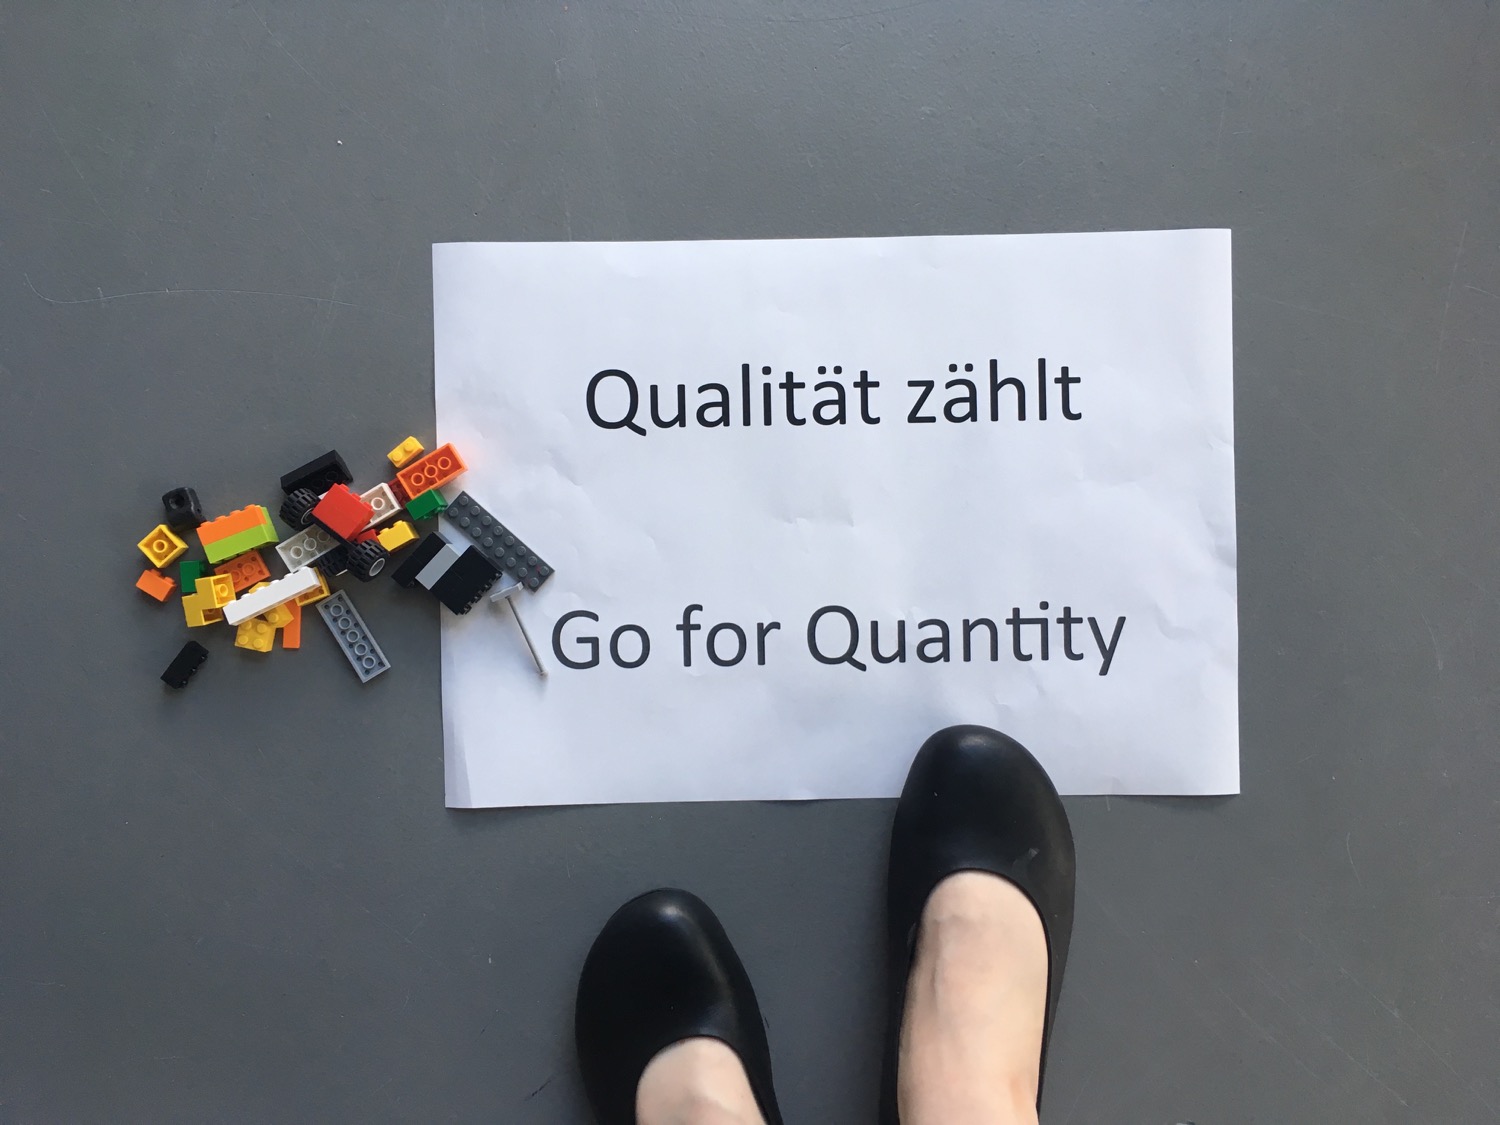 Sign saying "quality counts" and "quantity counts" in German/English